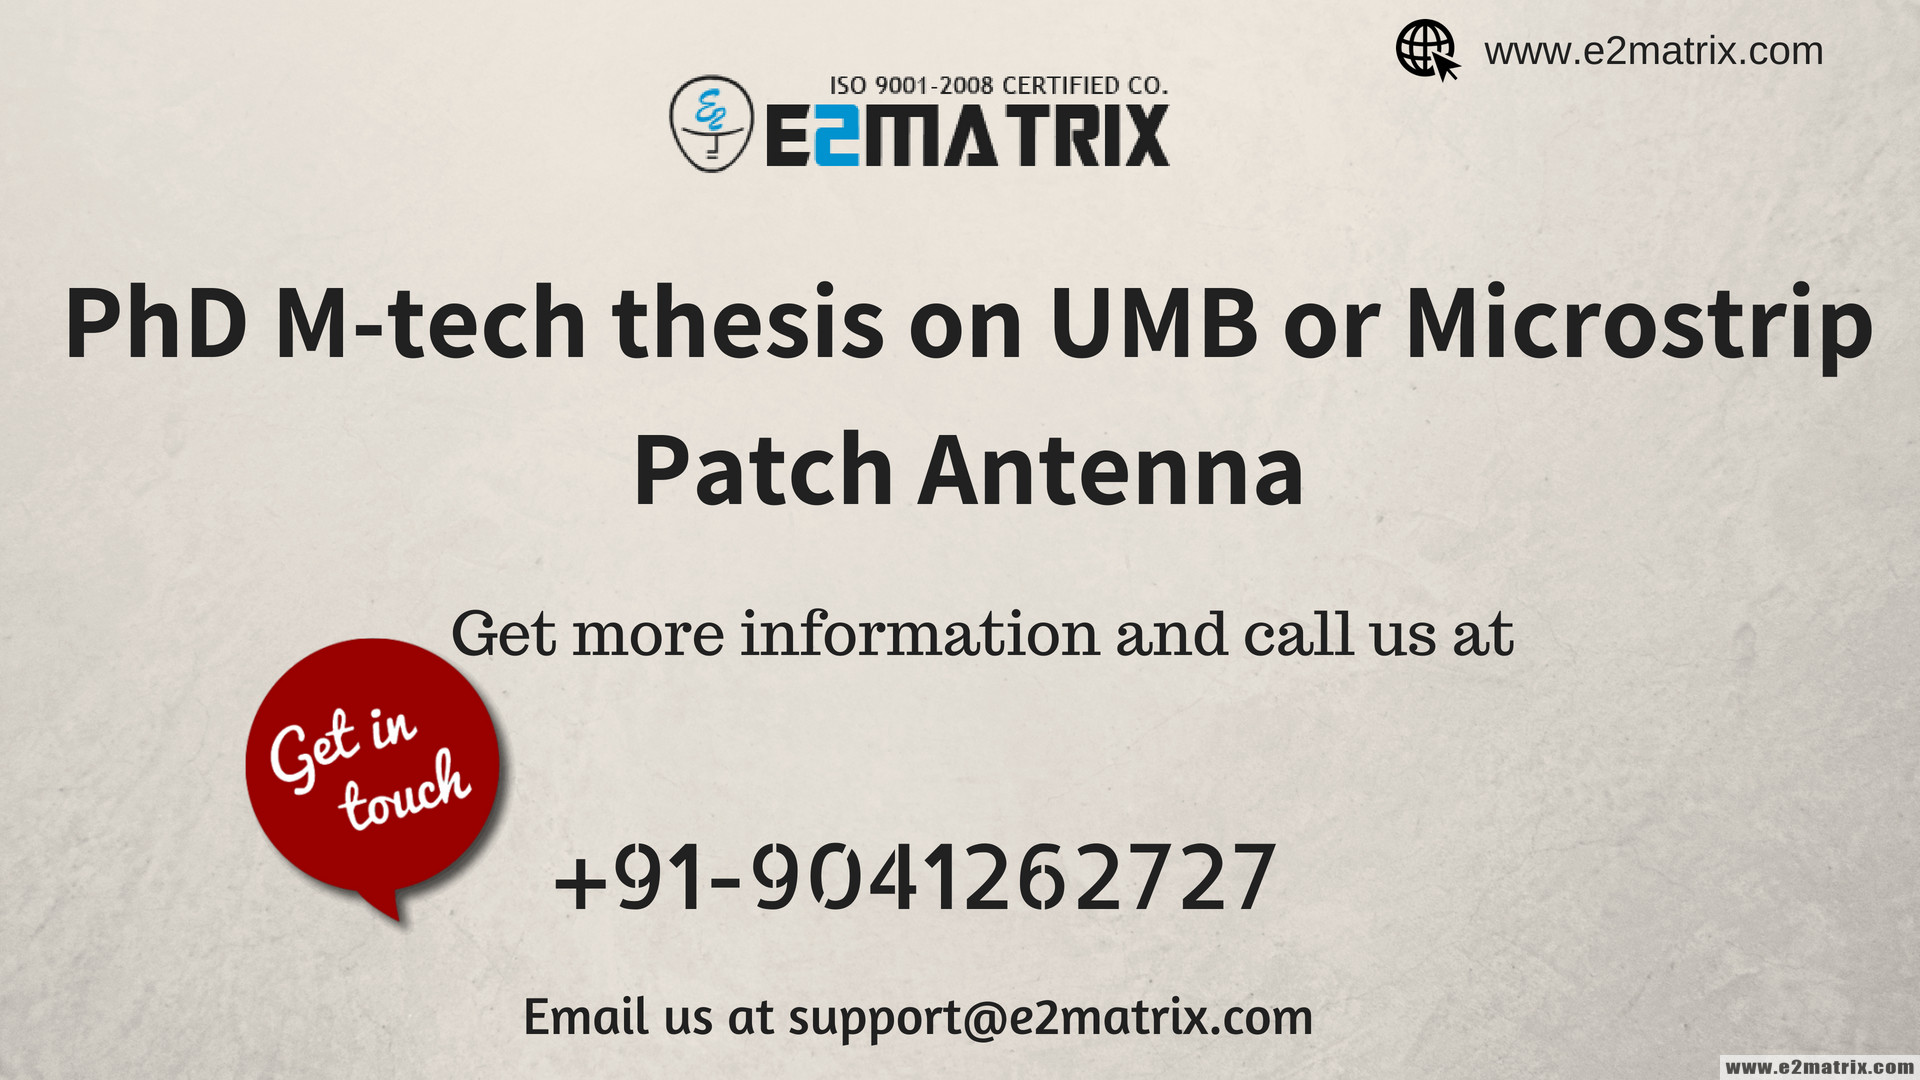 PhD M-tech thesis on UMB or Microstrip patch antenna